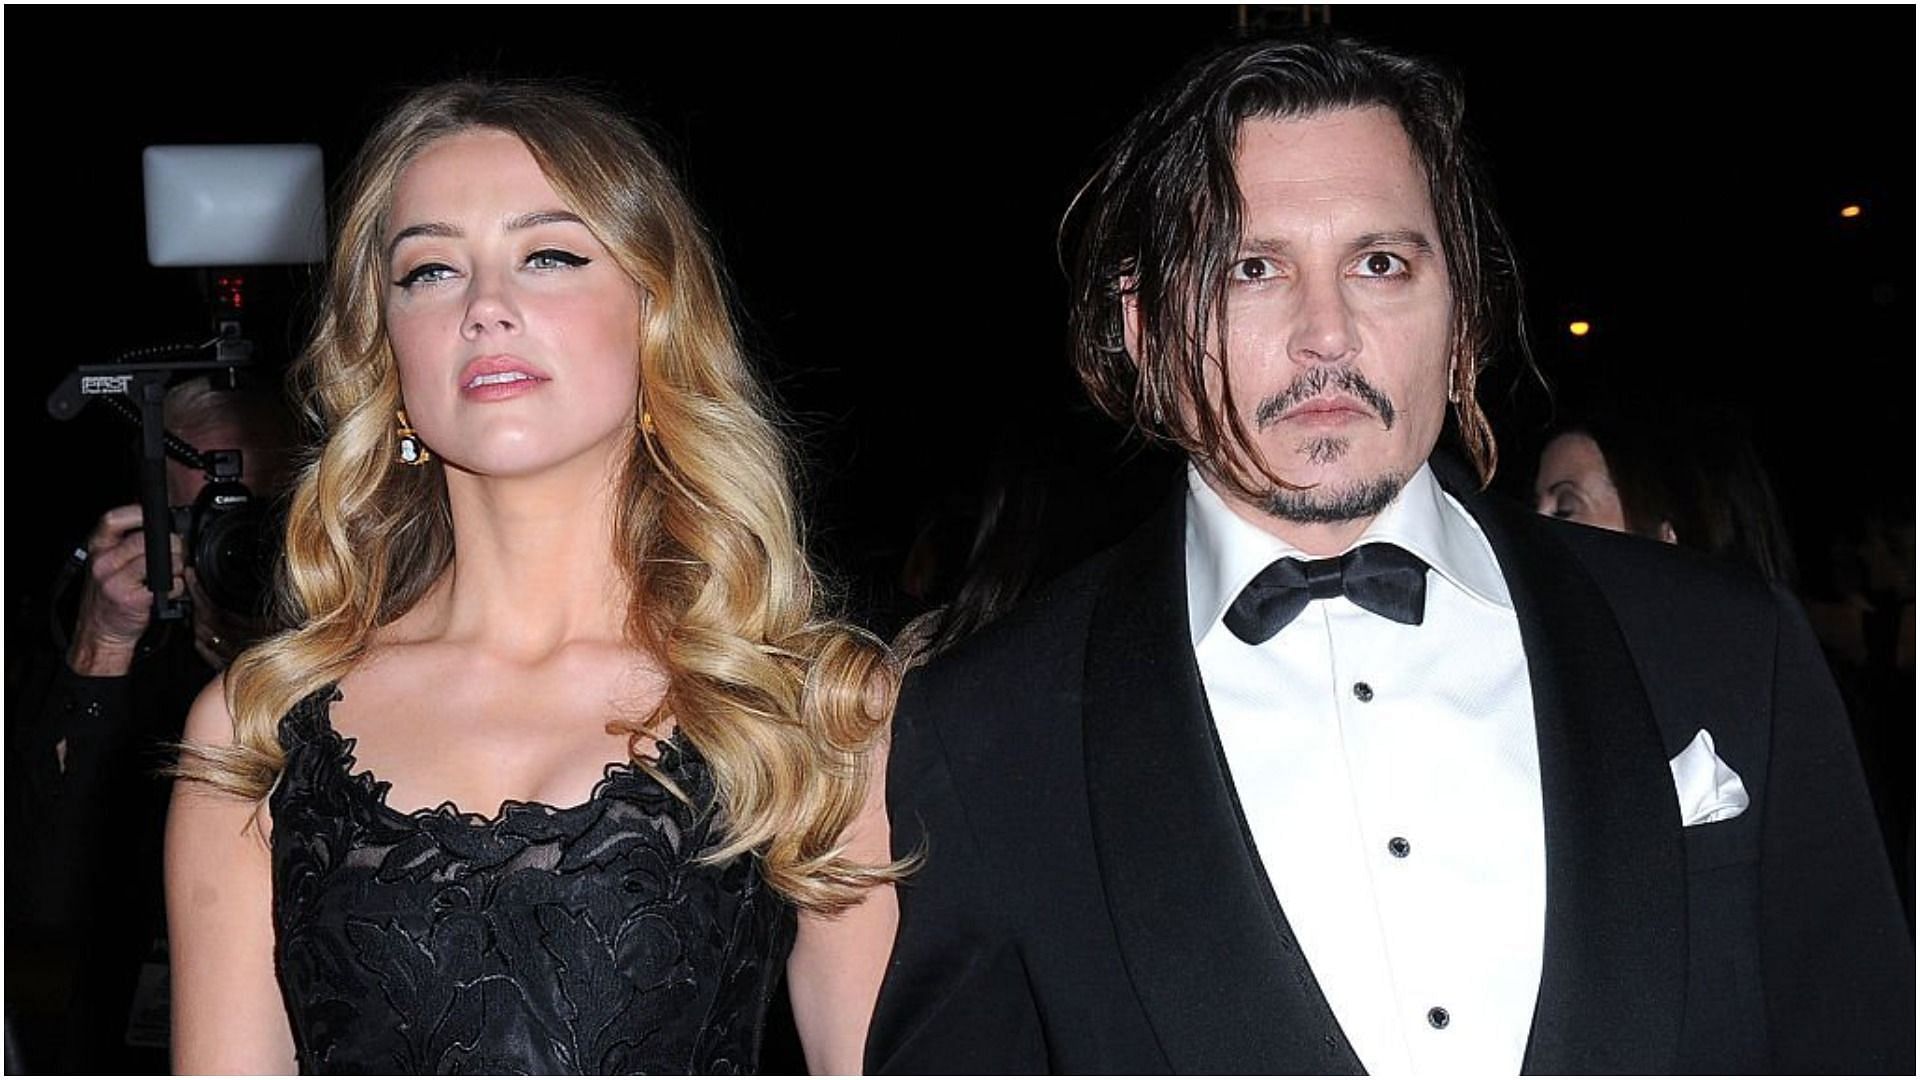 Johnny Depp has filed a $50 million lawsuit against Amber Heard (Image via Barry King/Getty Images)